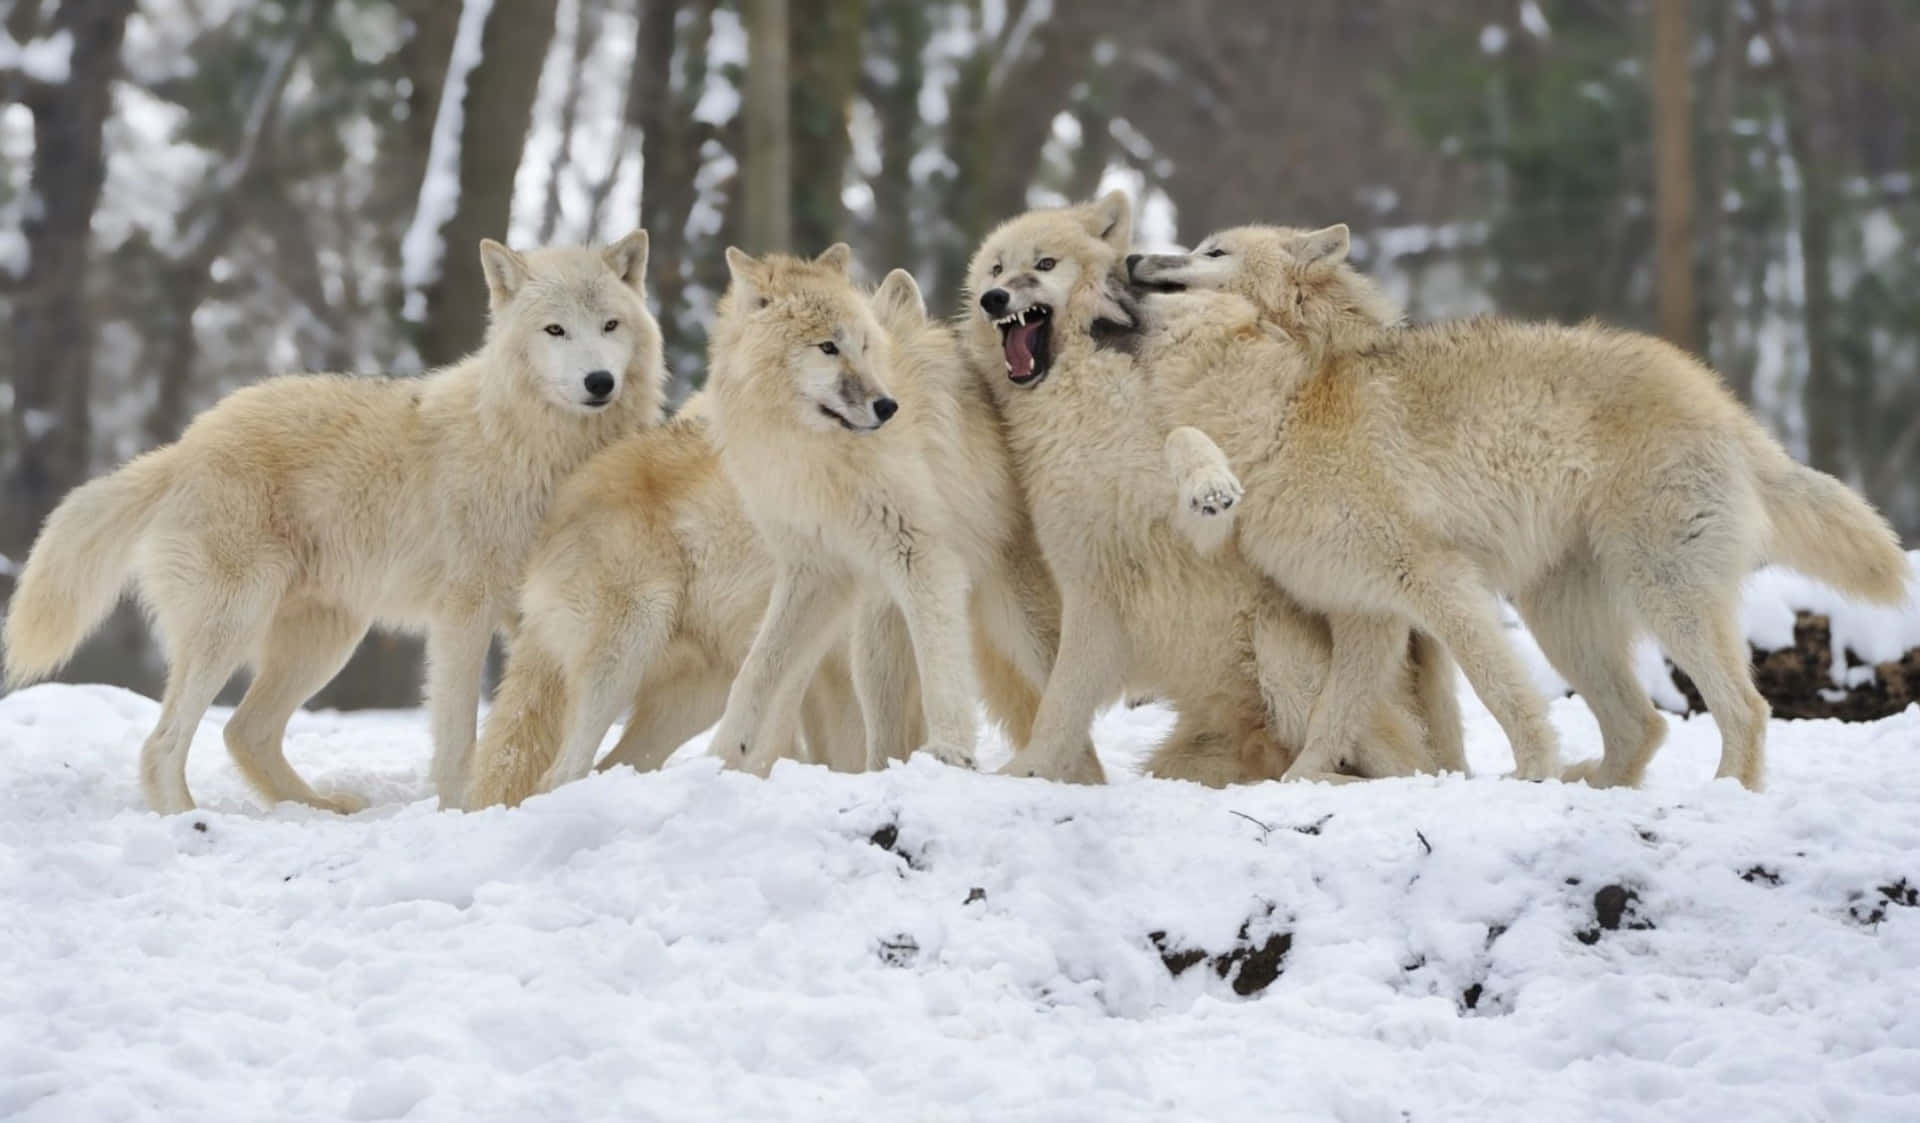 A fierce looking pack of wolves stands watch over a rugged, snowy terrain. Wallpaper